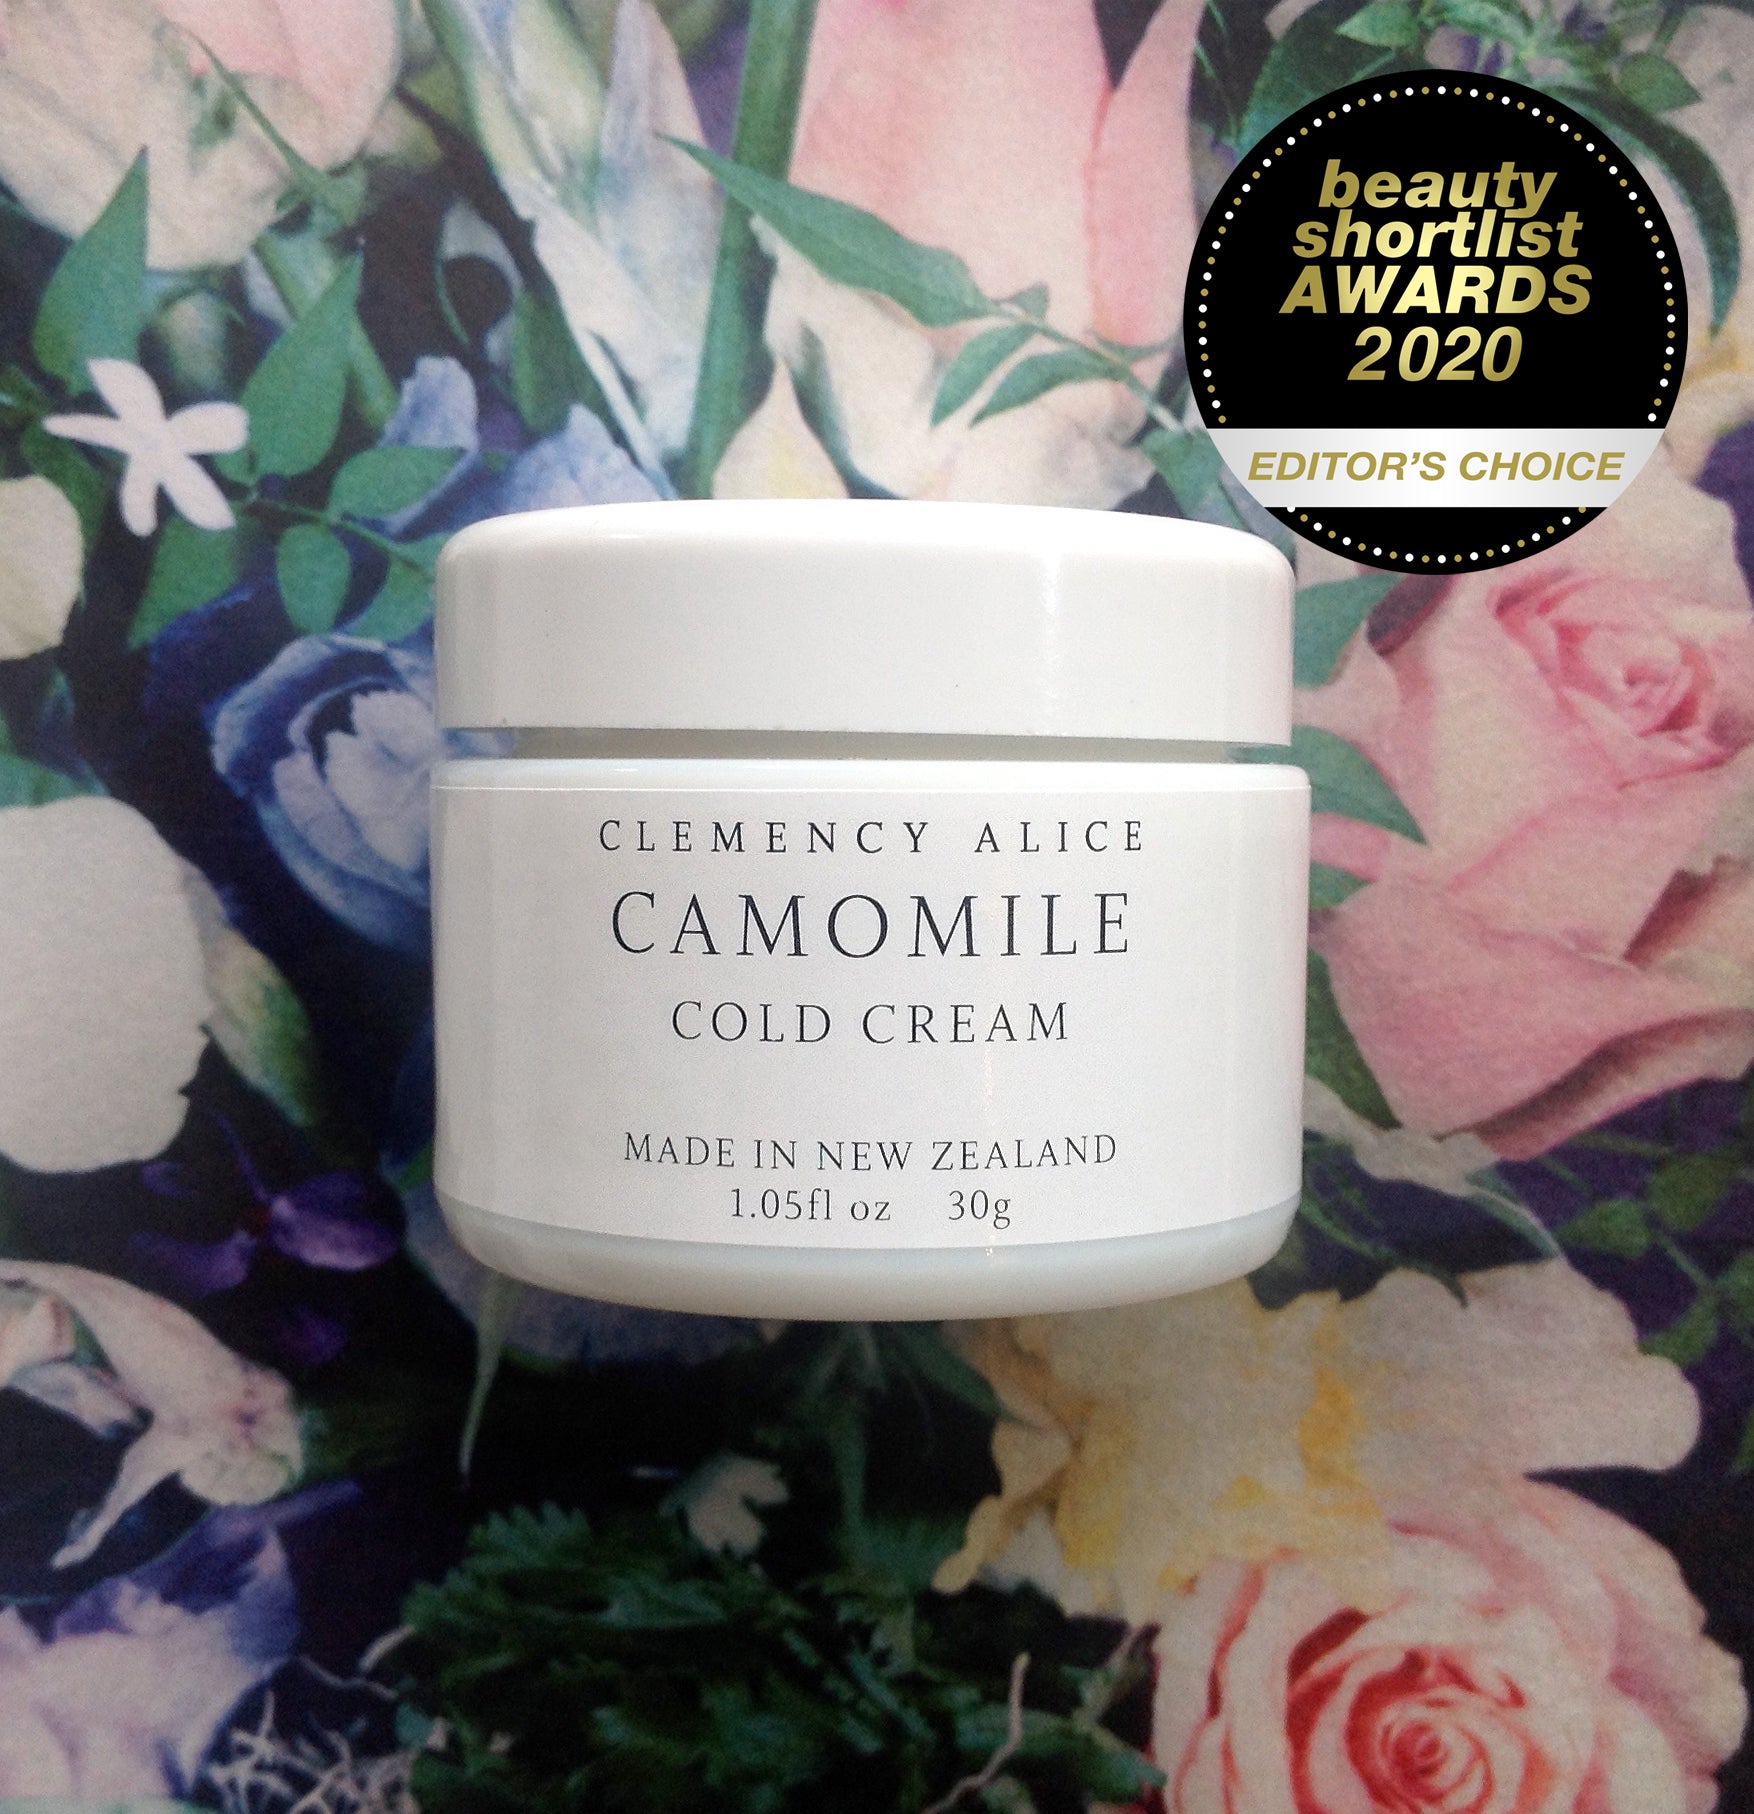 BESTSELLER - Camomile Cold Cream - Remastered